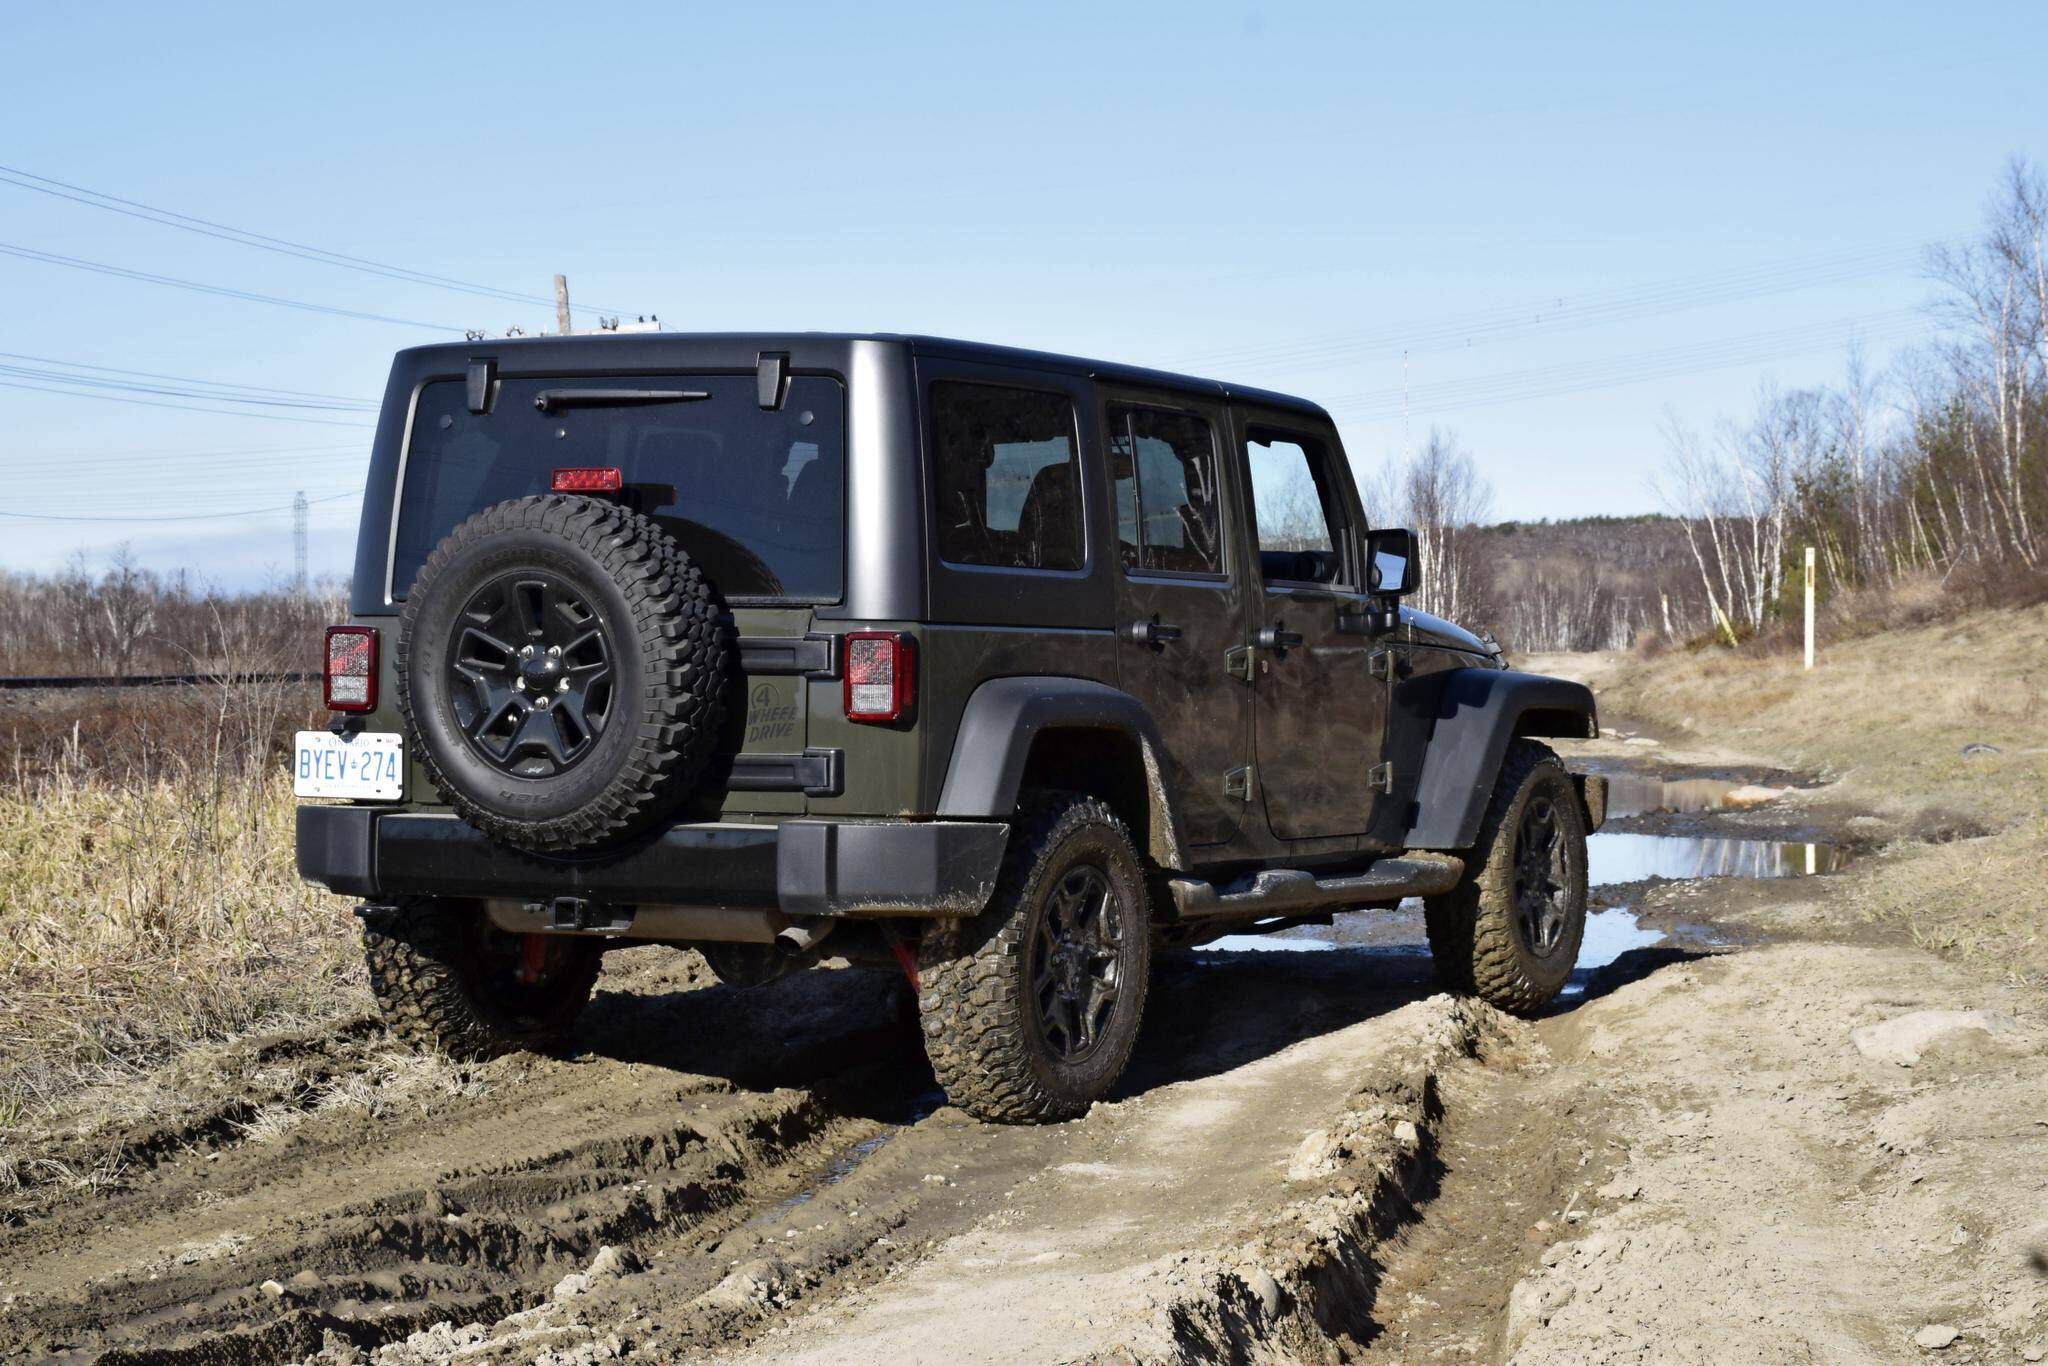 Review: 2016 Jeep Willys Wheeler is a lower-cost alternative for adventure  - The Globe and Mail